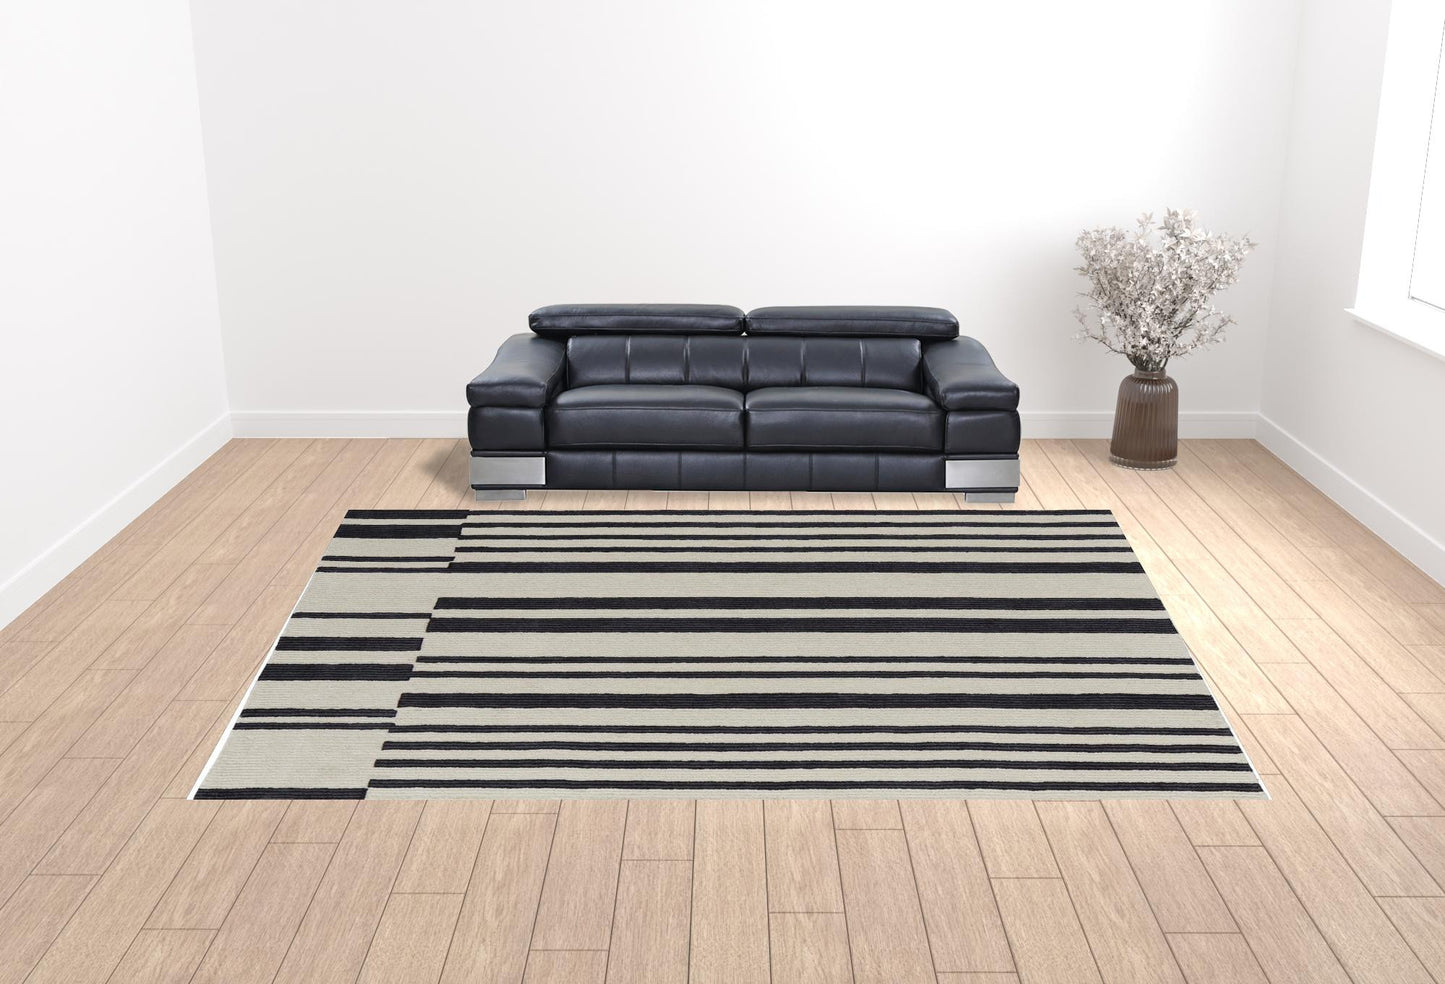 4' x 6' Ivory and Black Wool Abstract Hand Tufted Area Rug